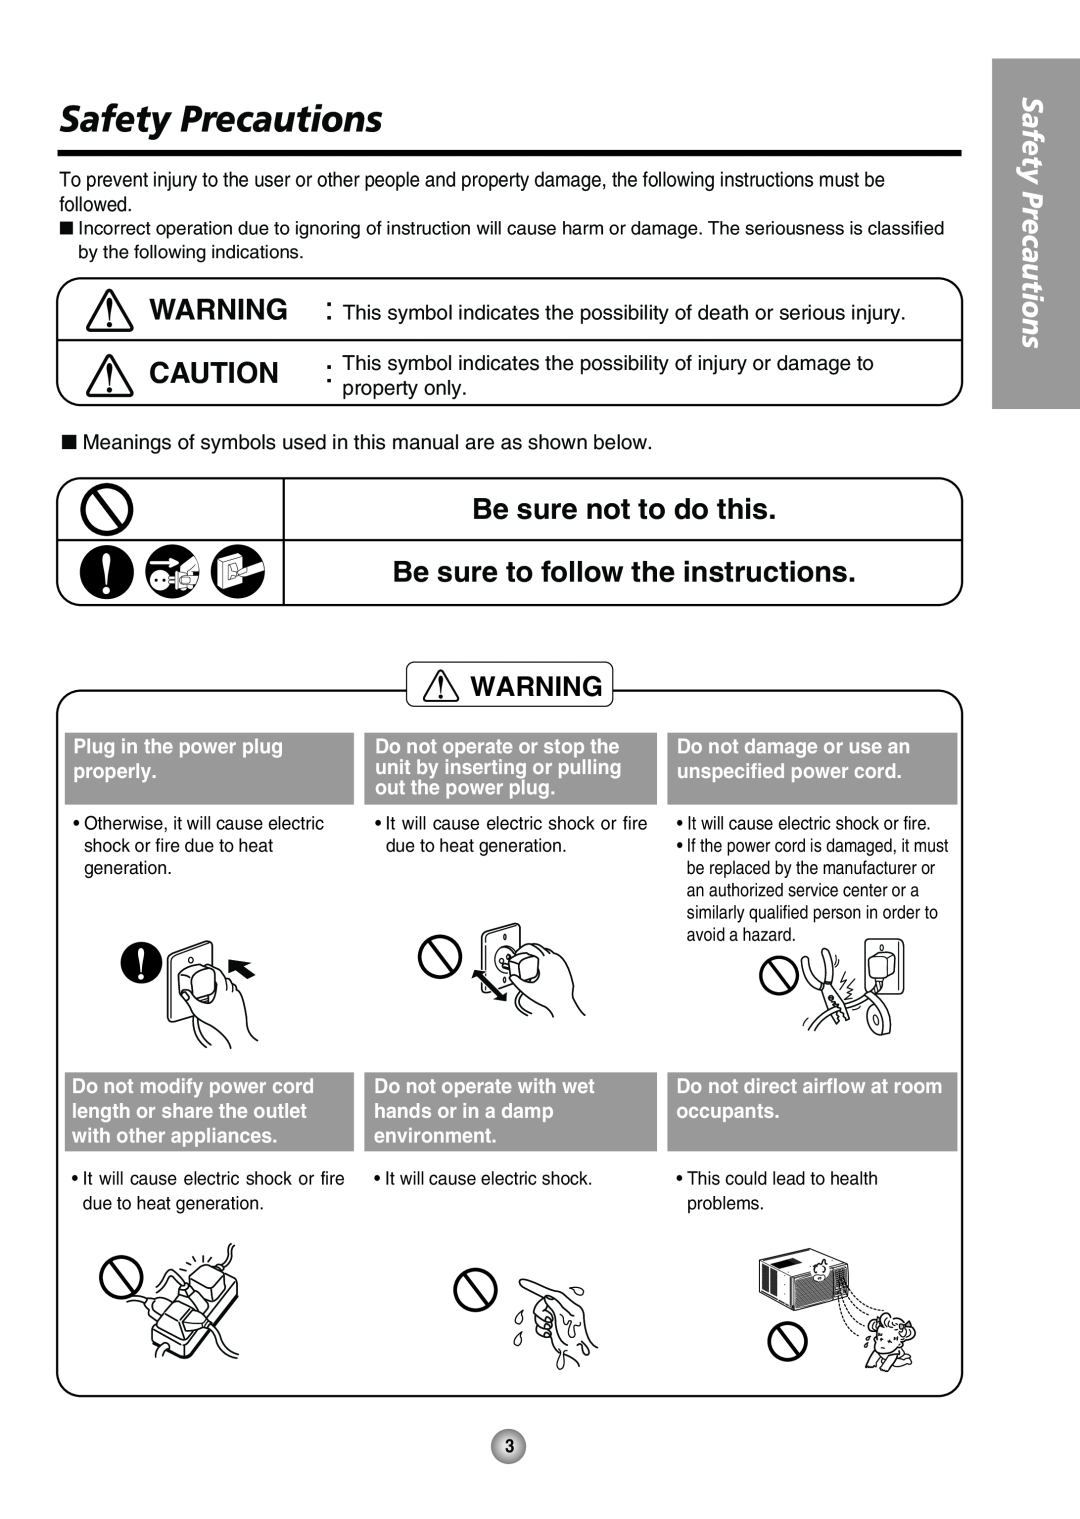 Panasonic CW-XC125HU Safety Precautions, Be sure not to do this, Be sure to follow the instructions, hands or in a damp 